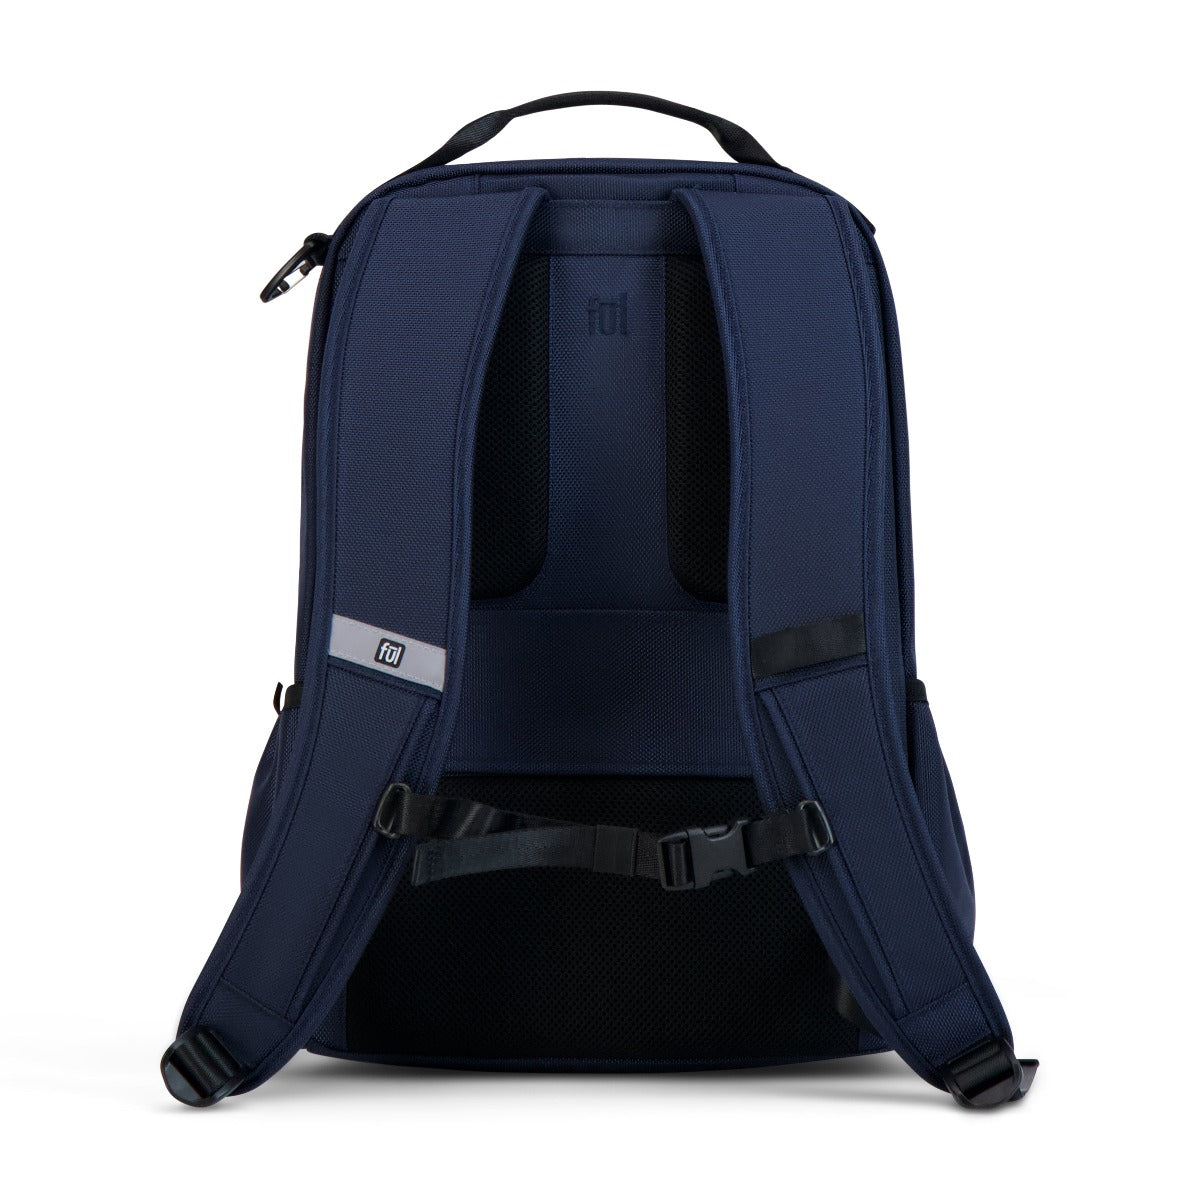 ful tactics collection phantom backpack navy blue - spacious tech backpacks